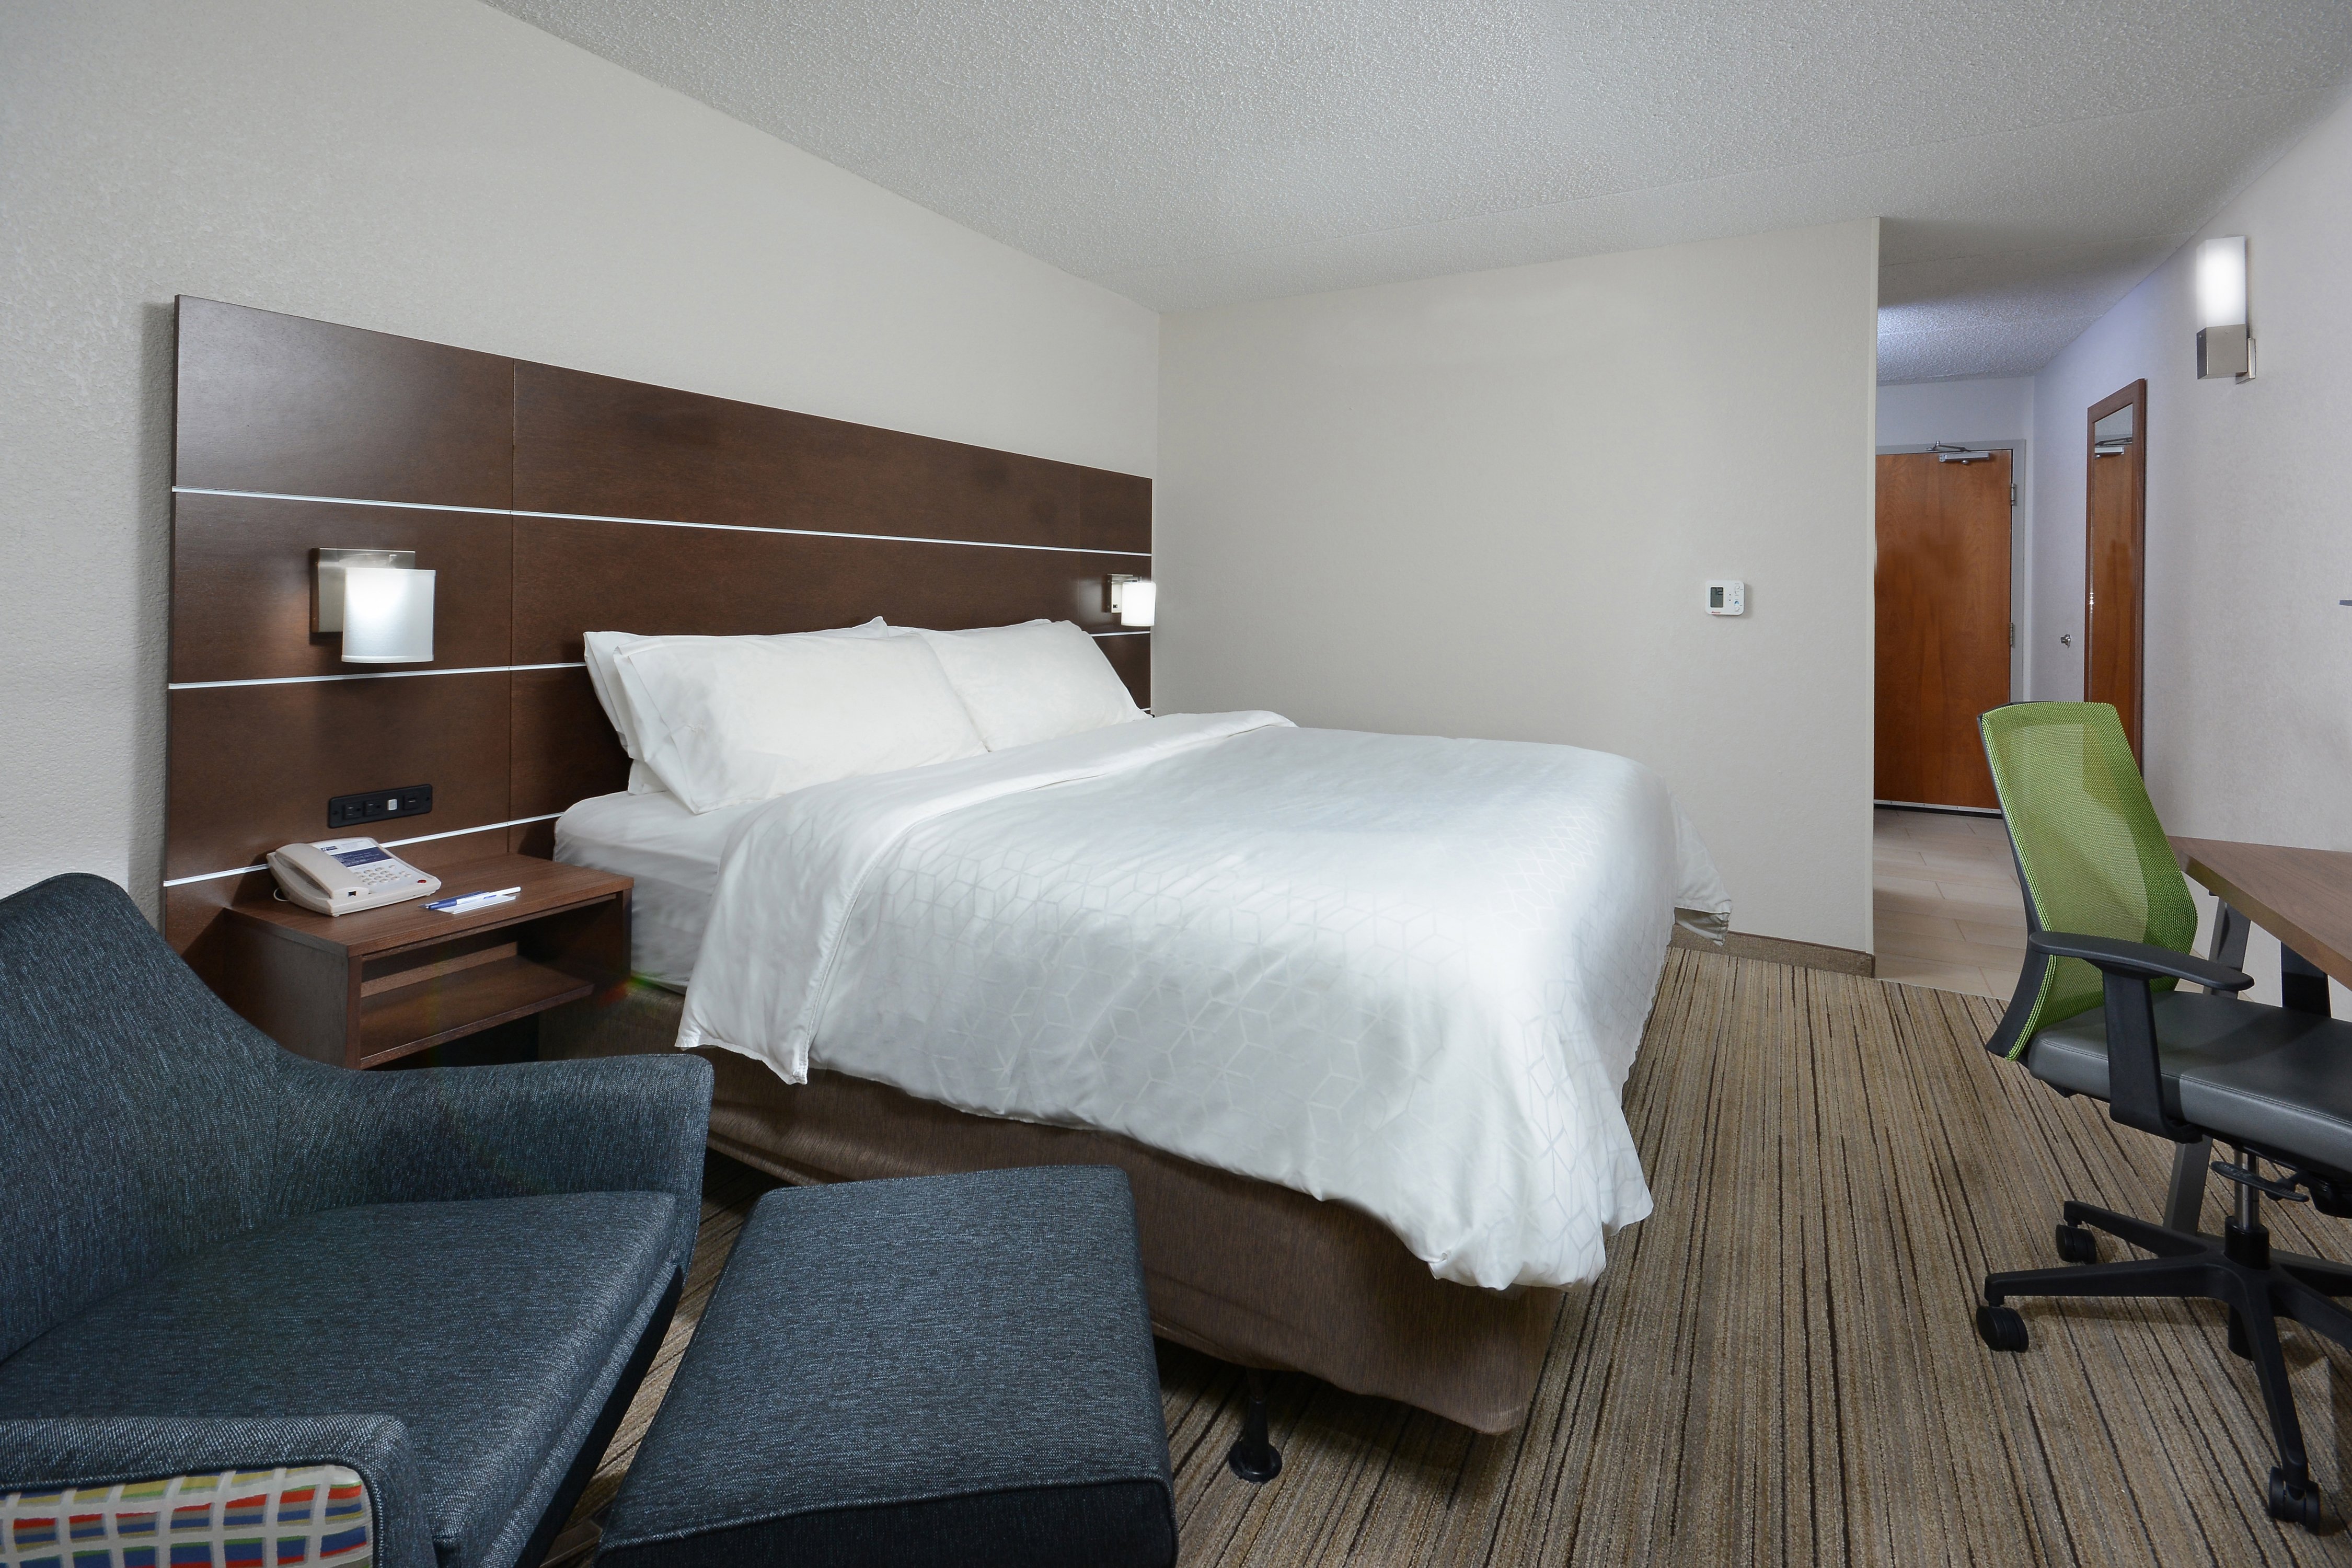 Enjoy an Accessible King Room at our Danville,VA hotel.